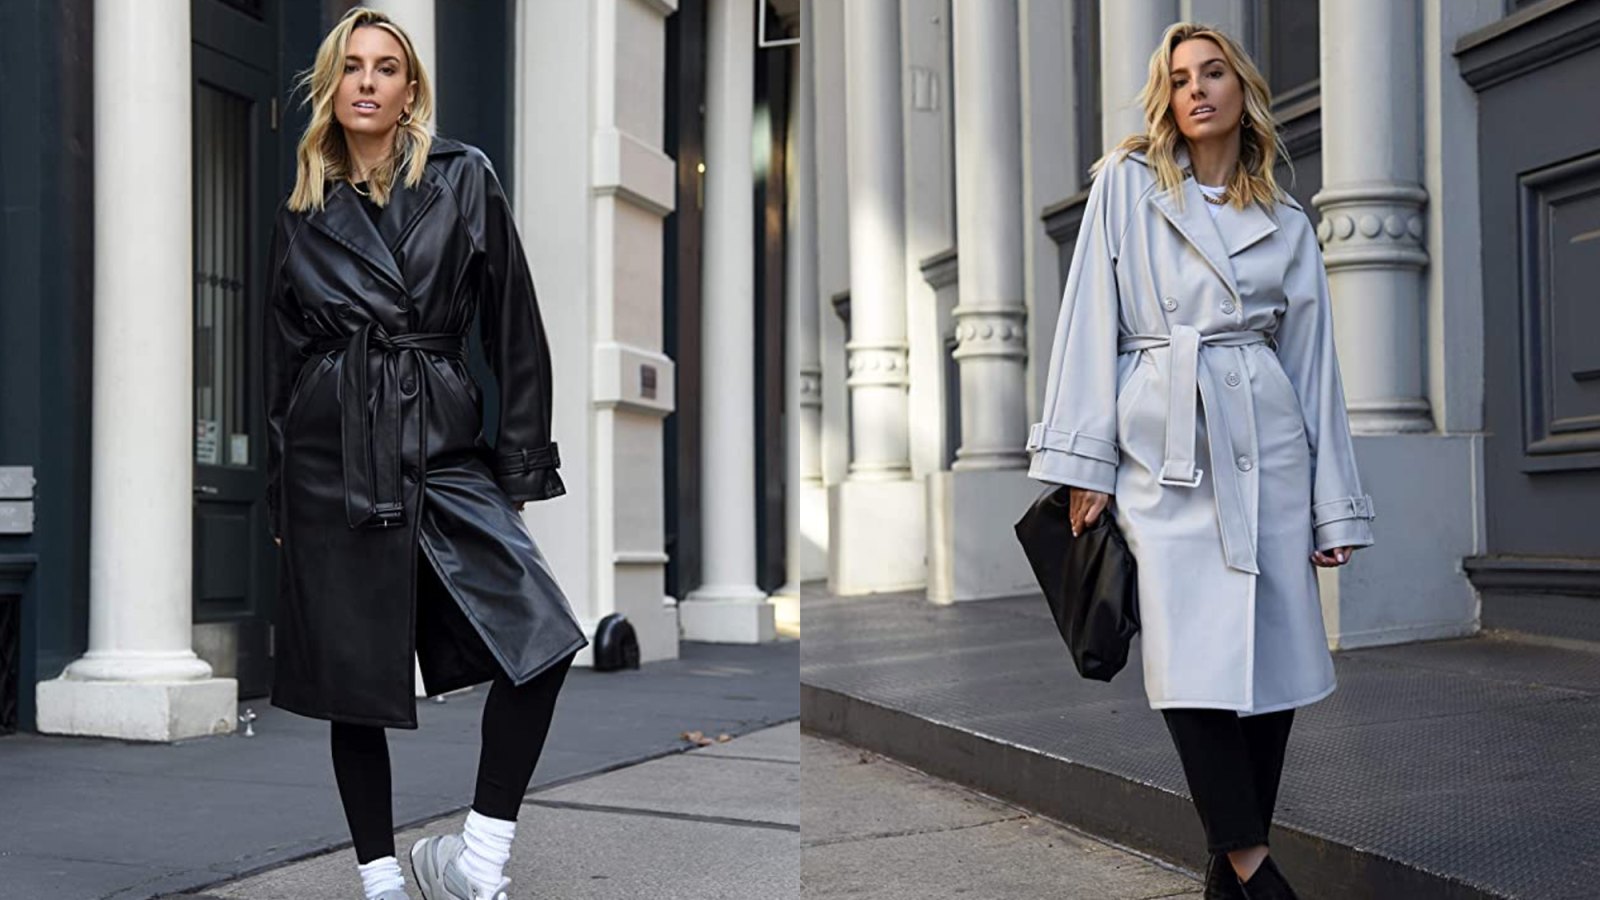 I used to hate faux leather coats, but these outfits changed my mind